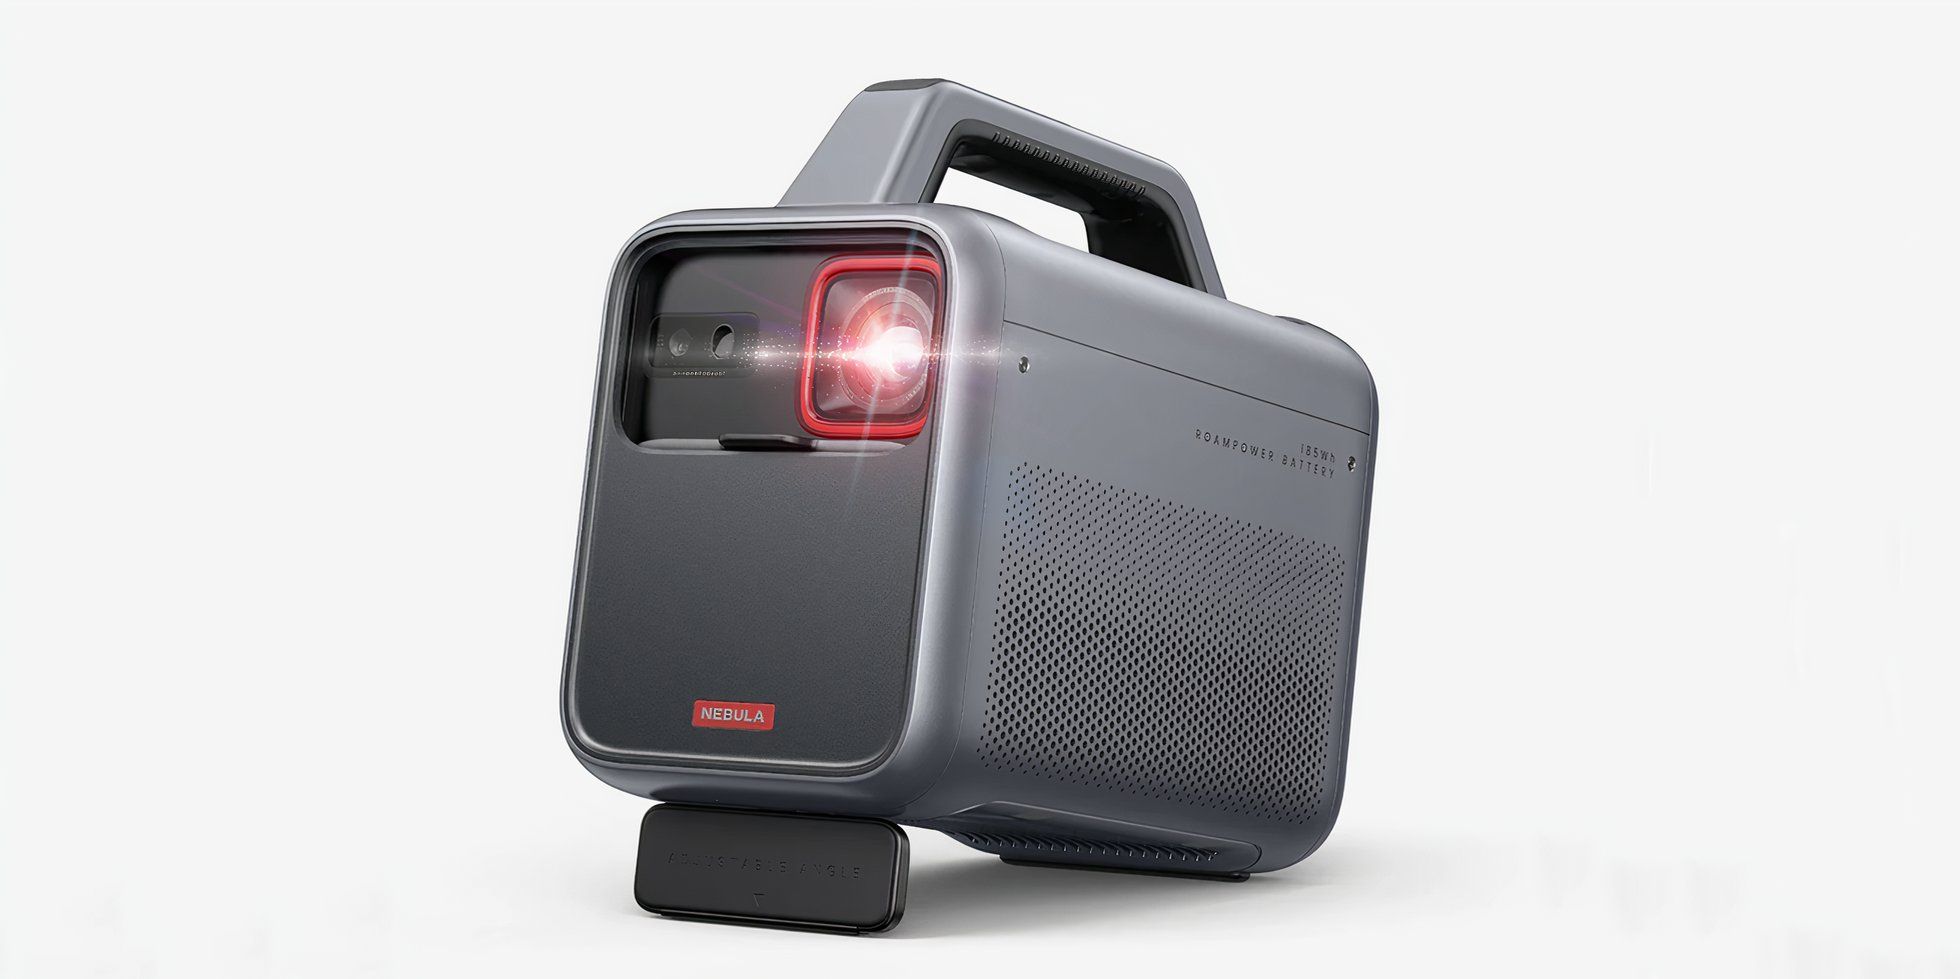 A product image of Anker's Nebula Mars 3 Projector, which includes a handle